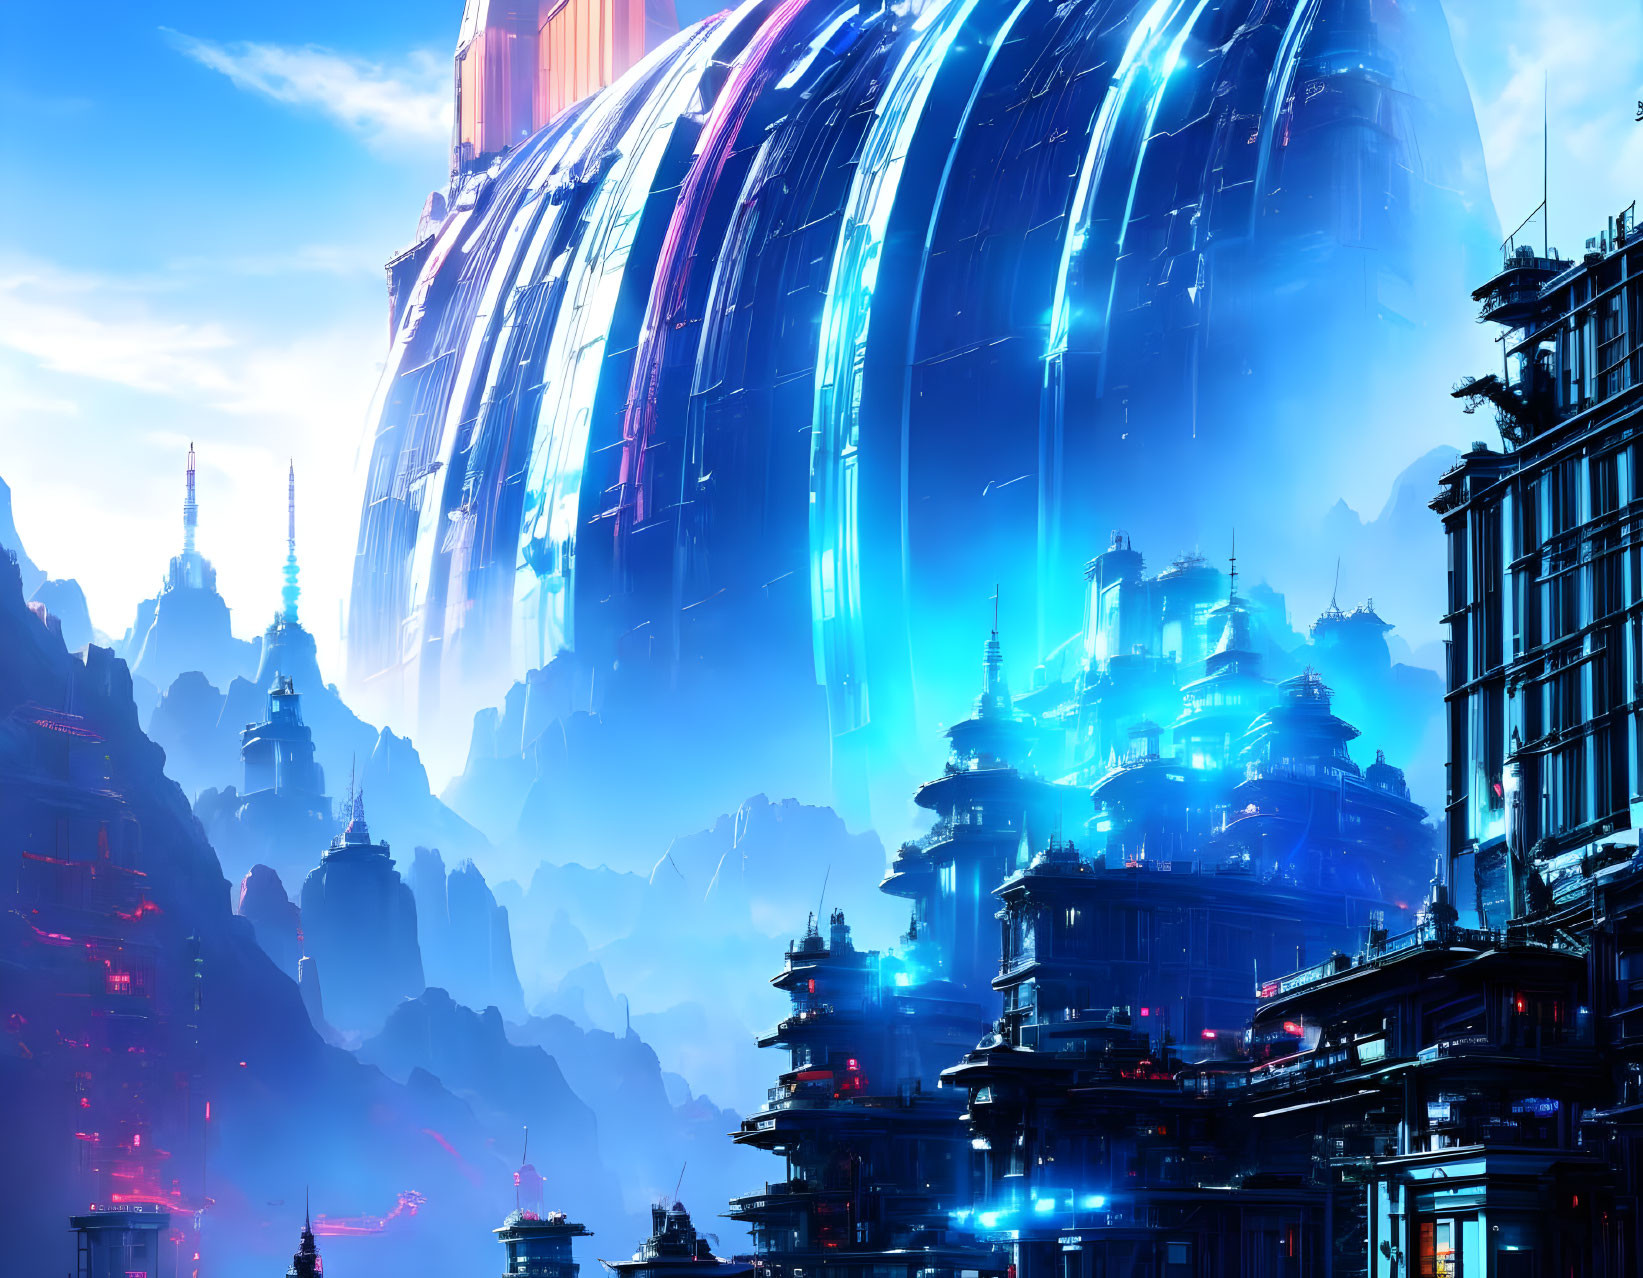 Futuristic cityscape with neon lights, skyscrapers, and glowing dome against mountains